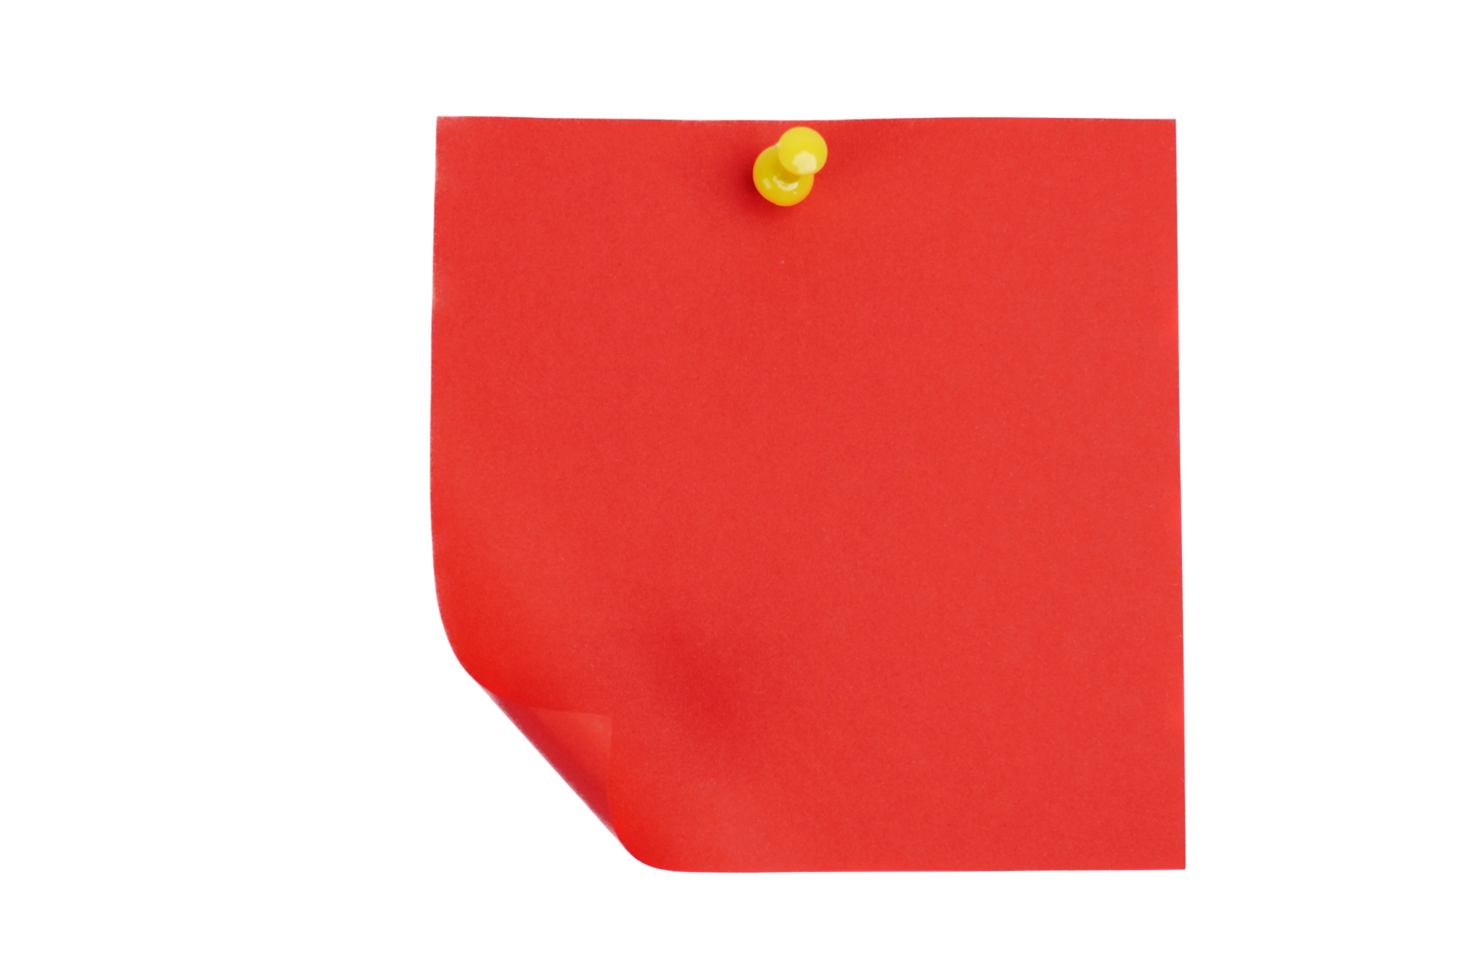 Sticky Note Paper Transparent png